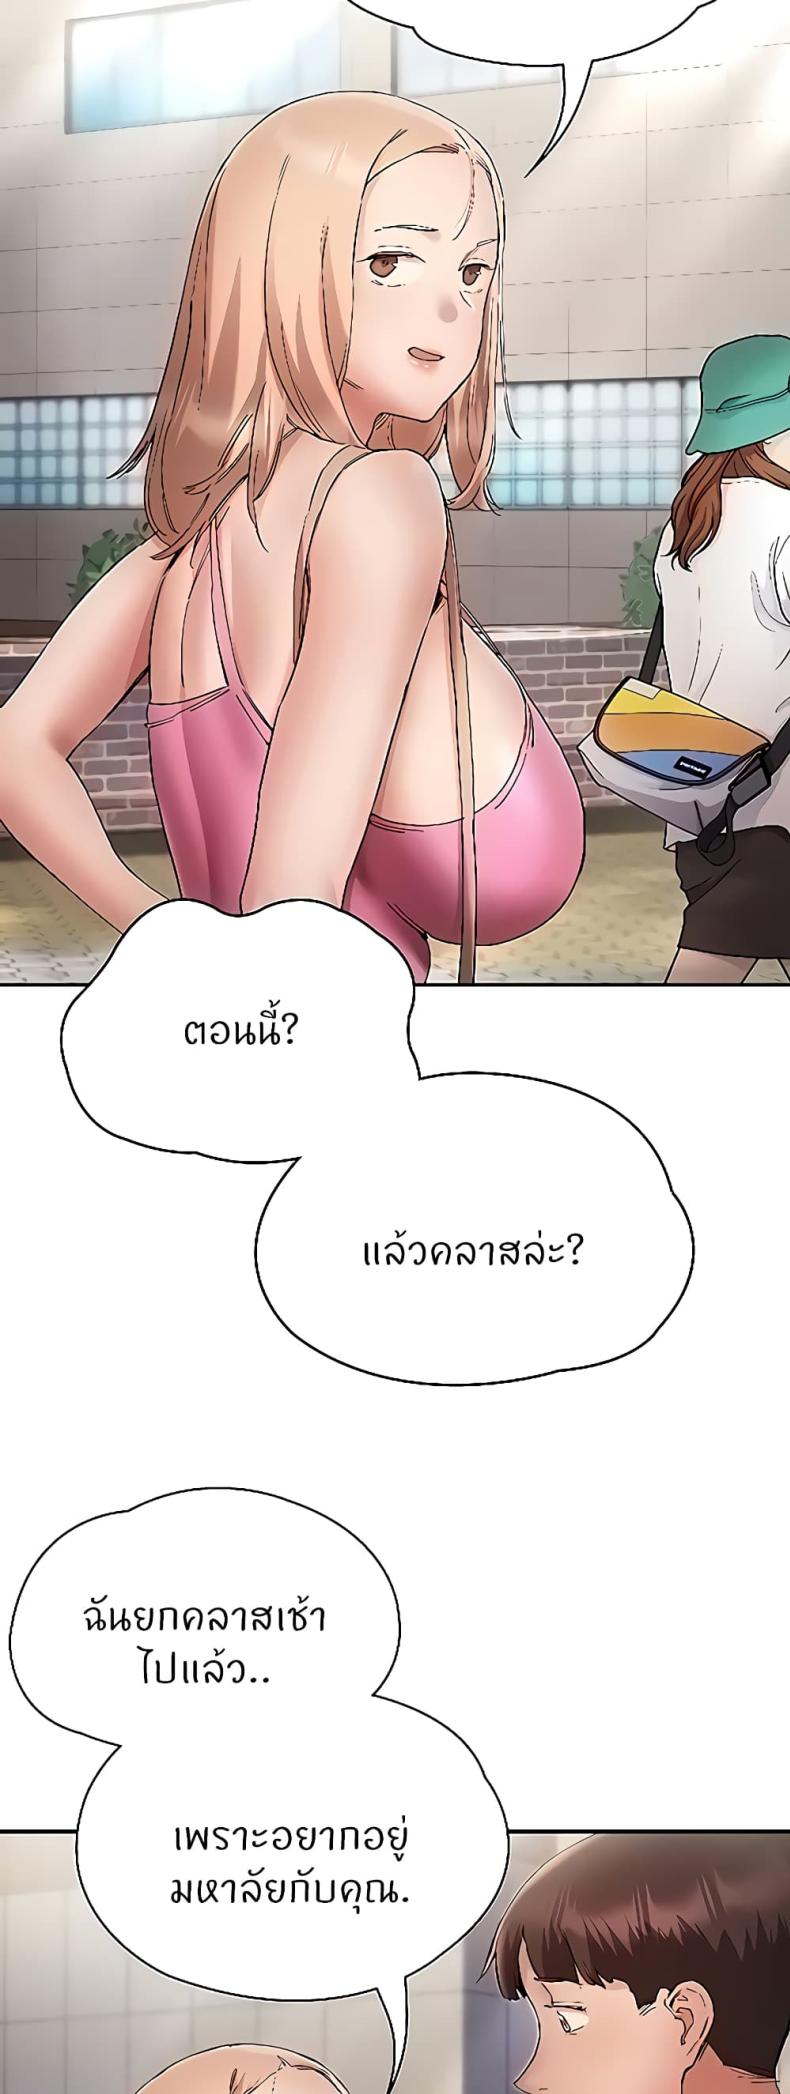 Living With Two Busty Women 23 ภาพที่ 6